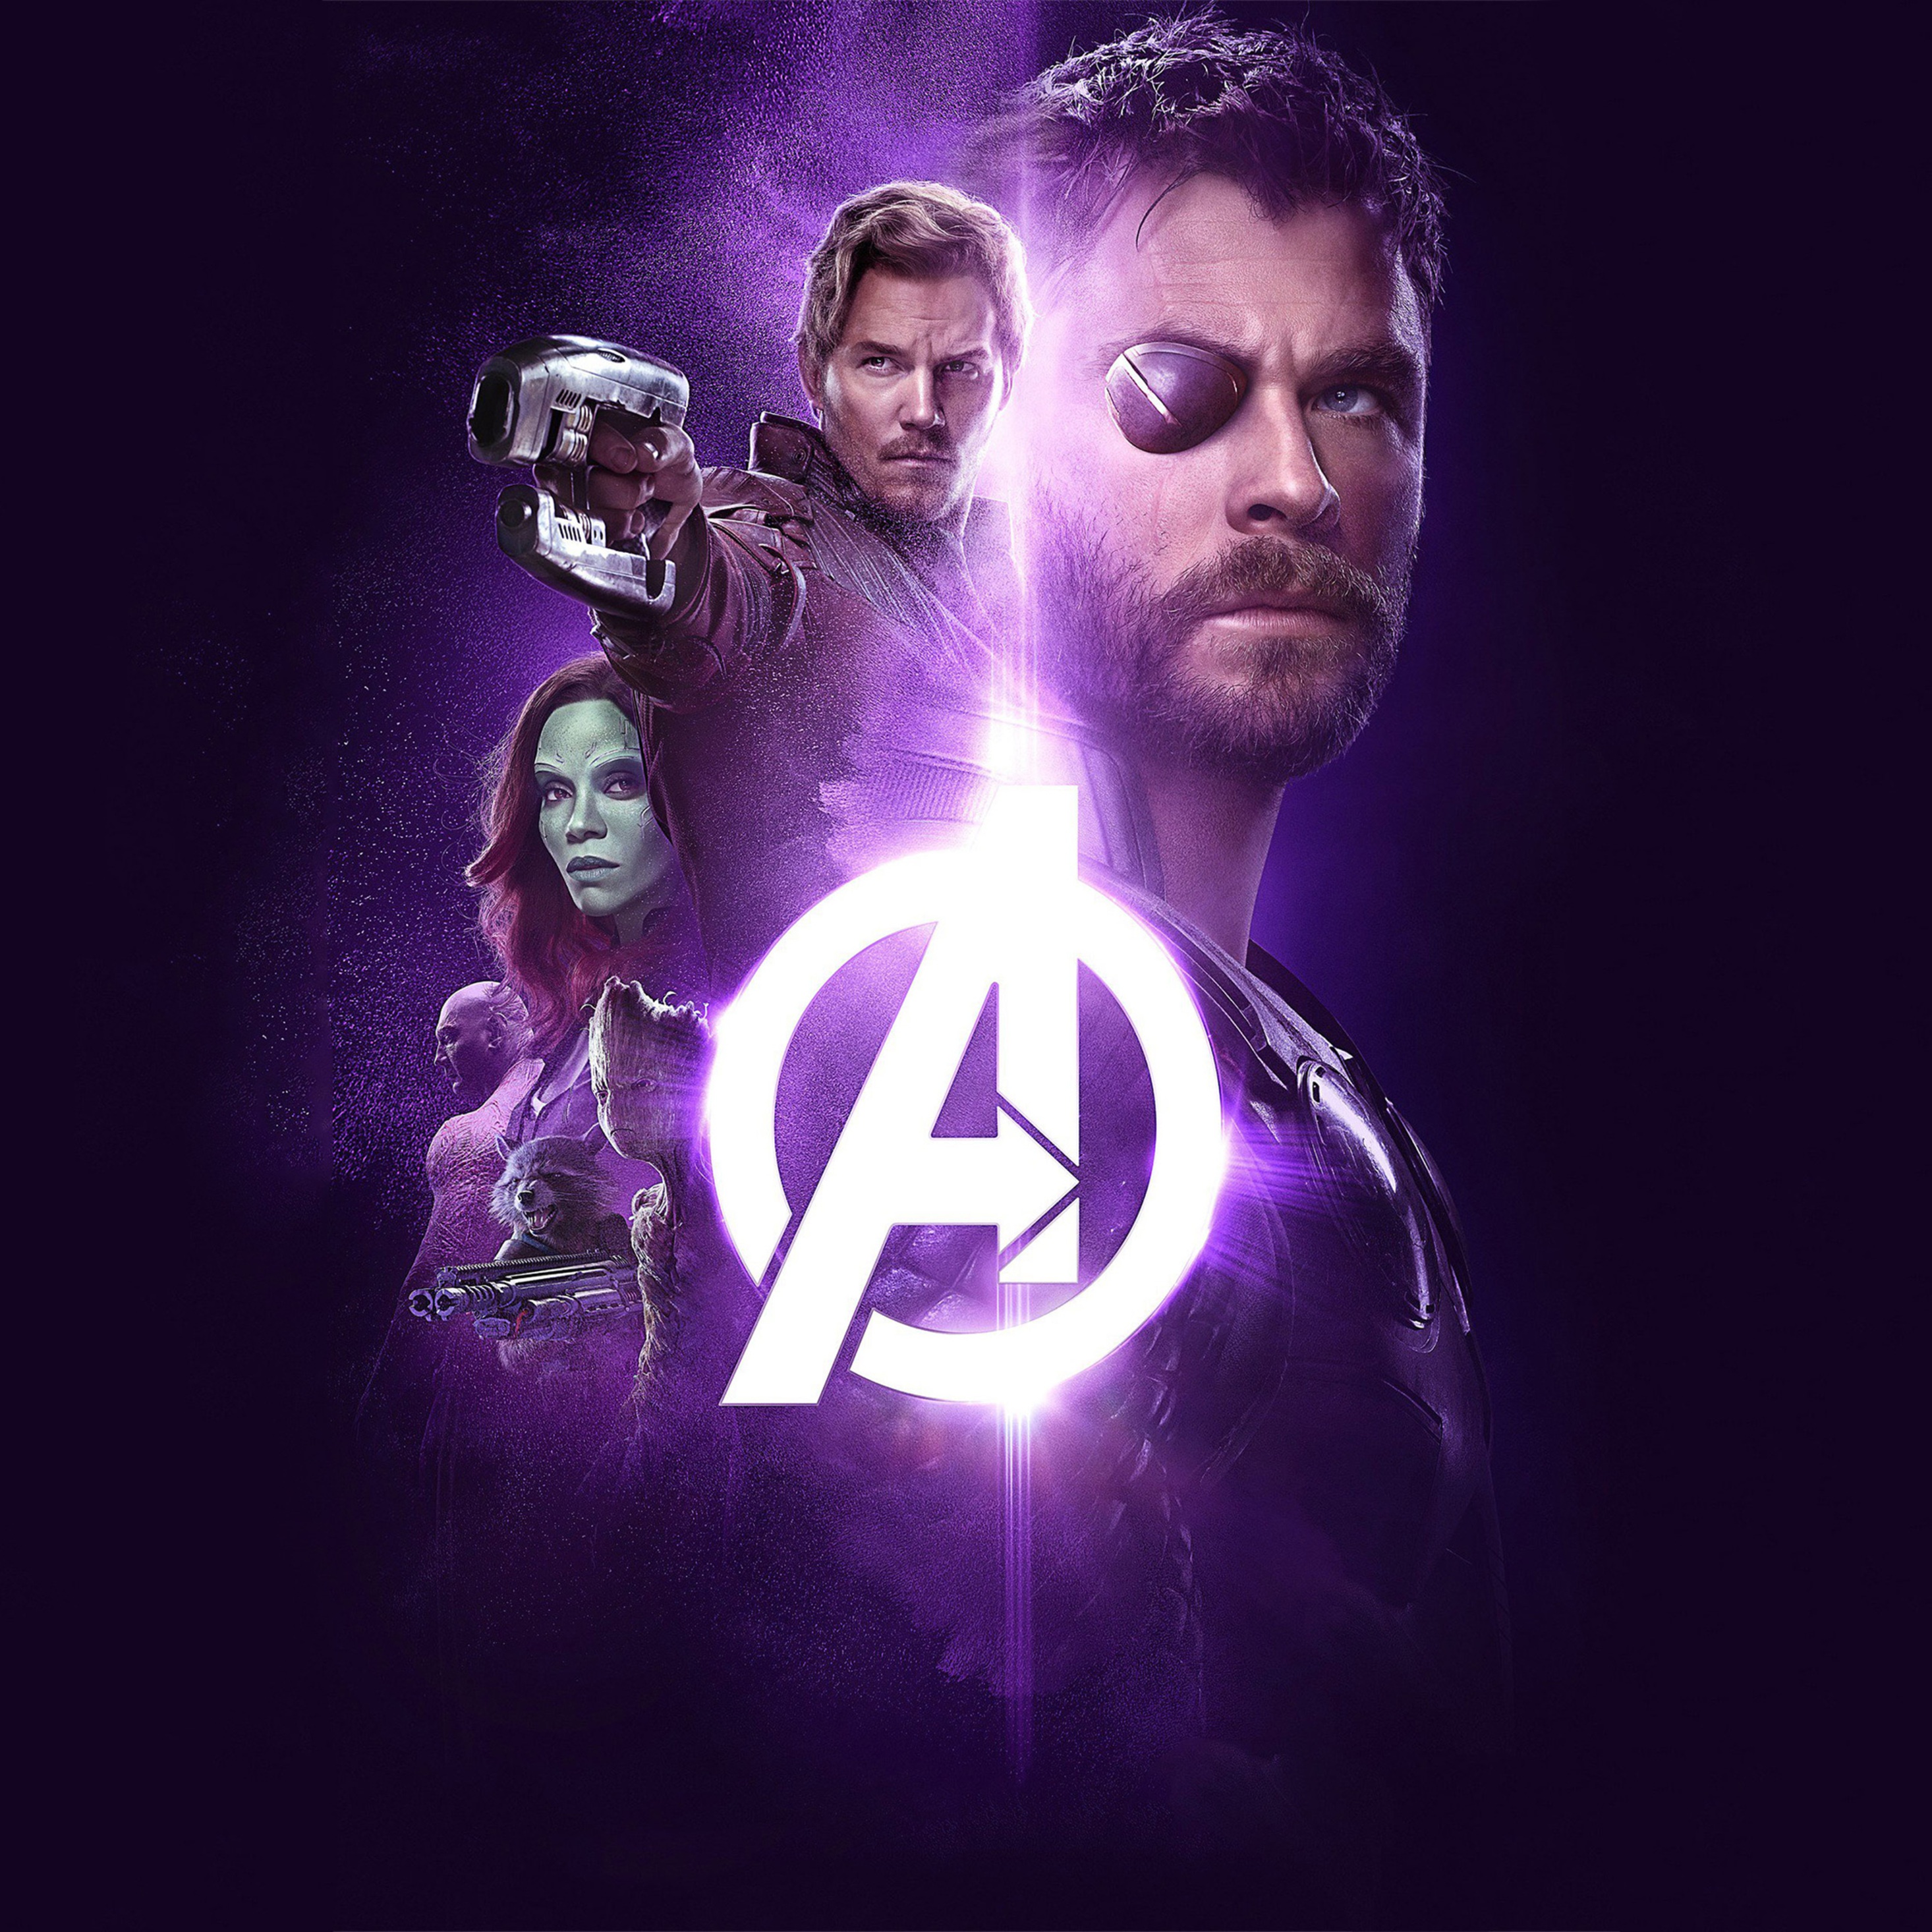 Avengers Infinity War 2018 Power Stone Poster Wallpapers